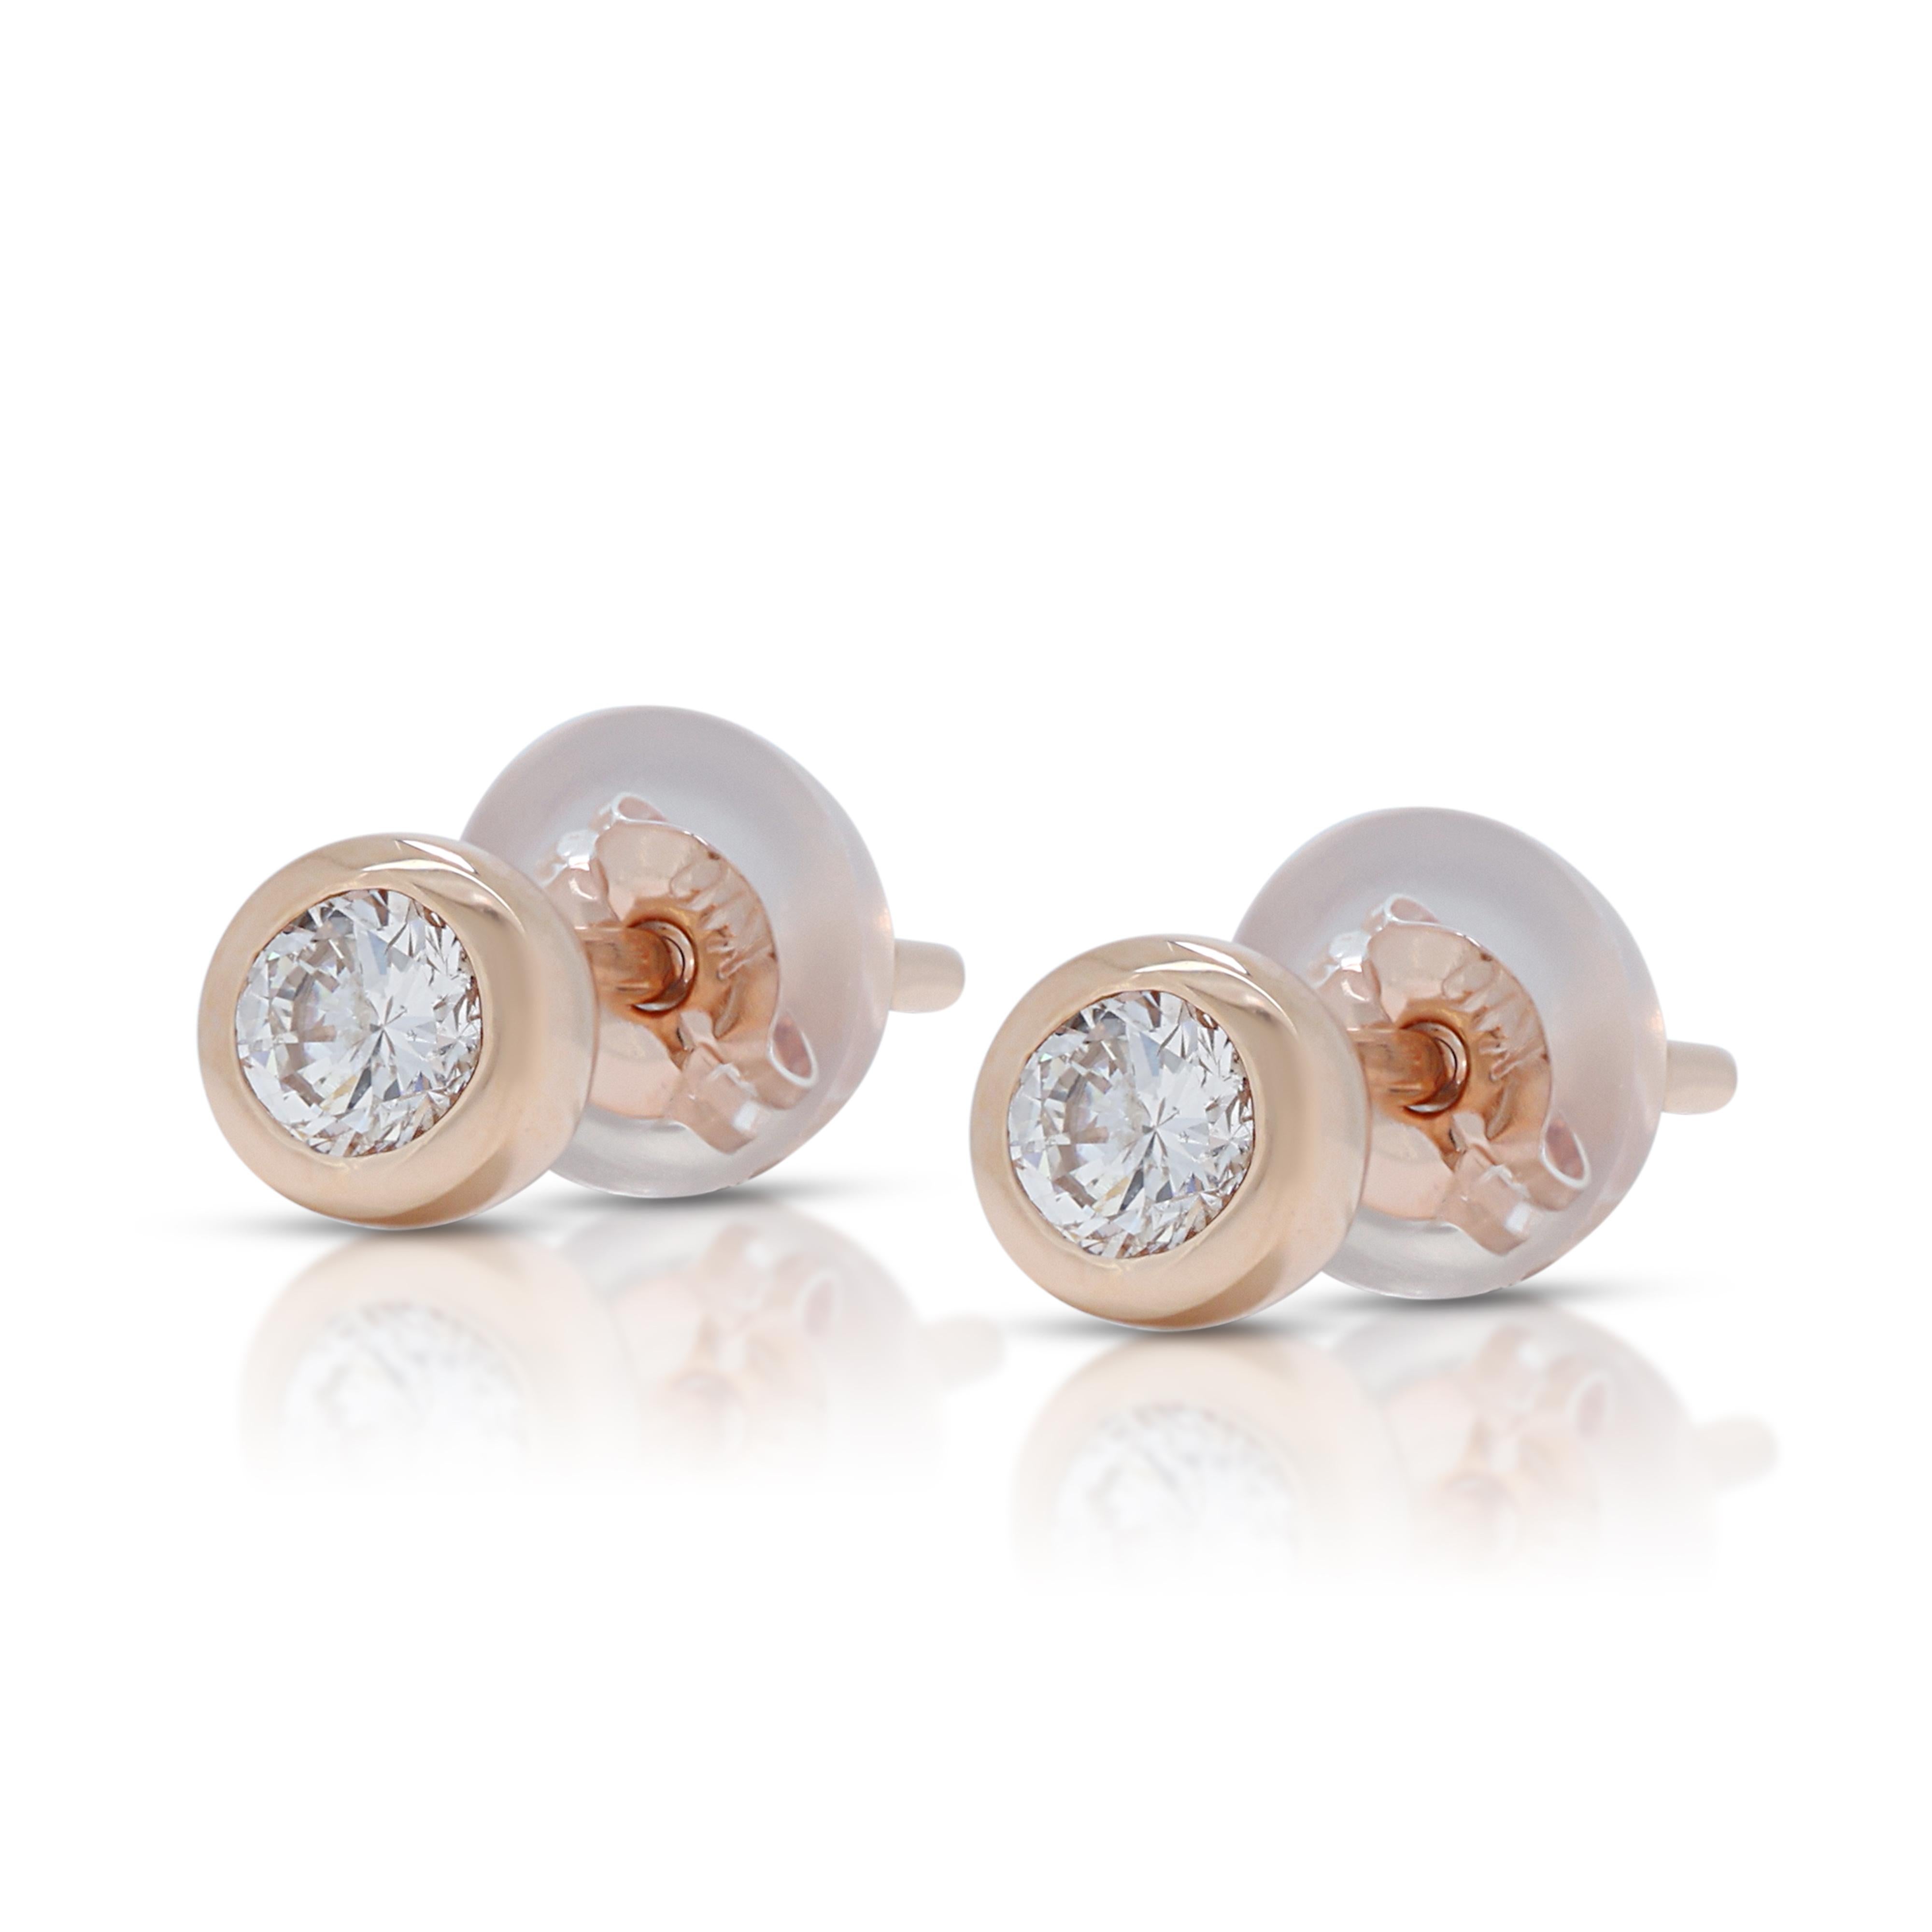 Classic 0.16ct Diamond Stud Earrings in 18K Rose Gold In Excellent Condition For Sale In רמת גן, IL